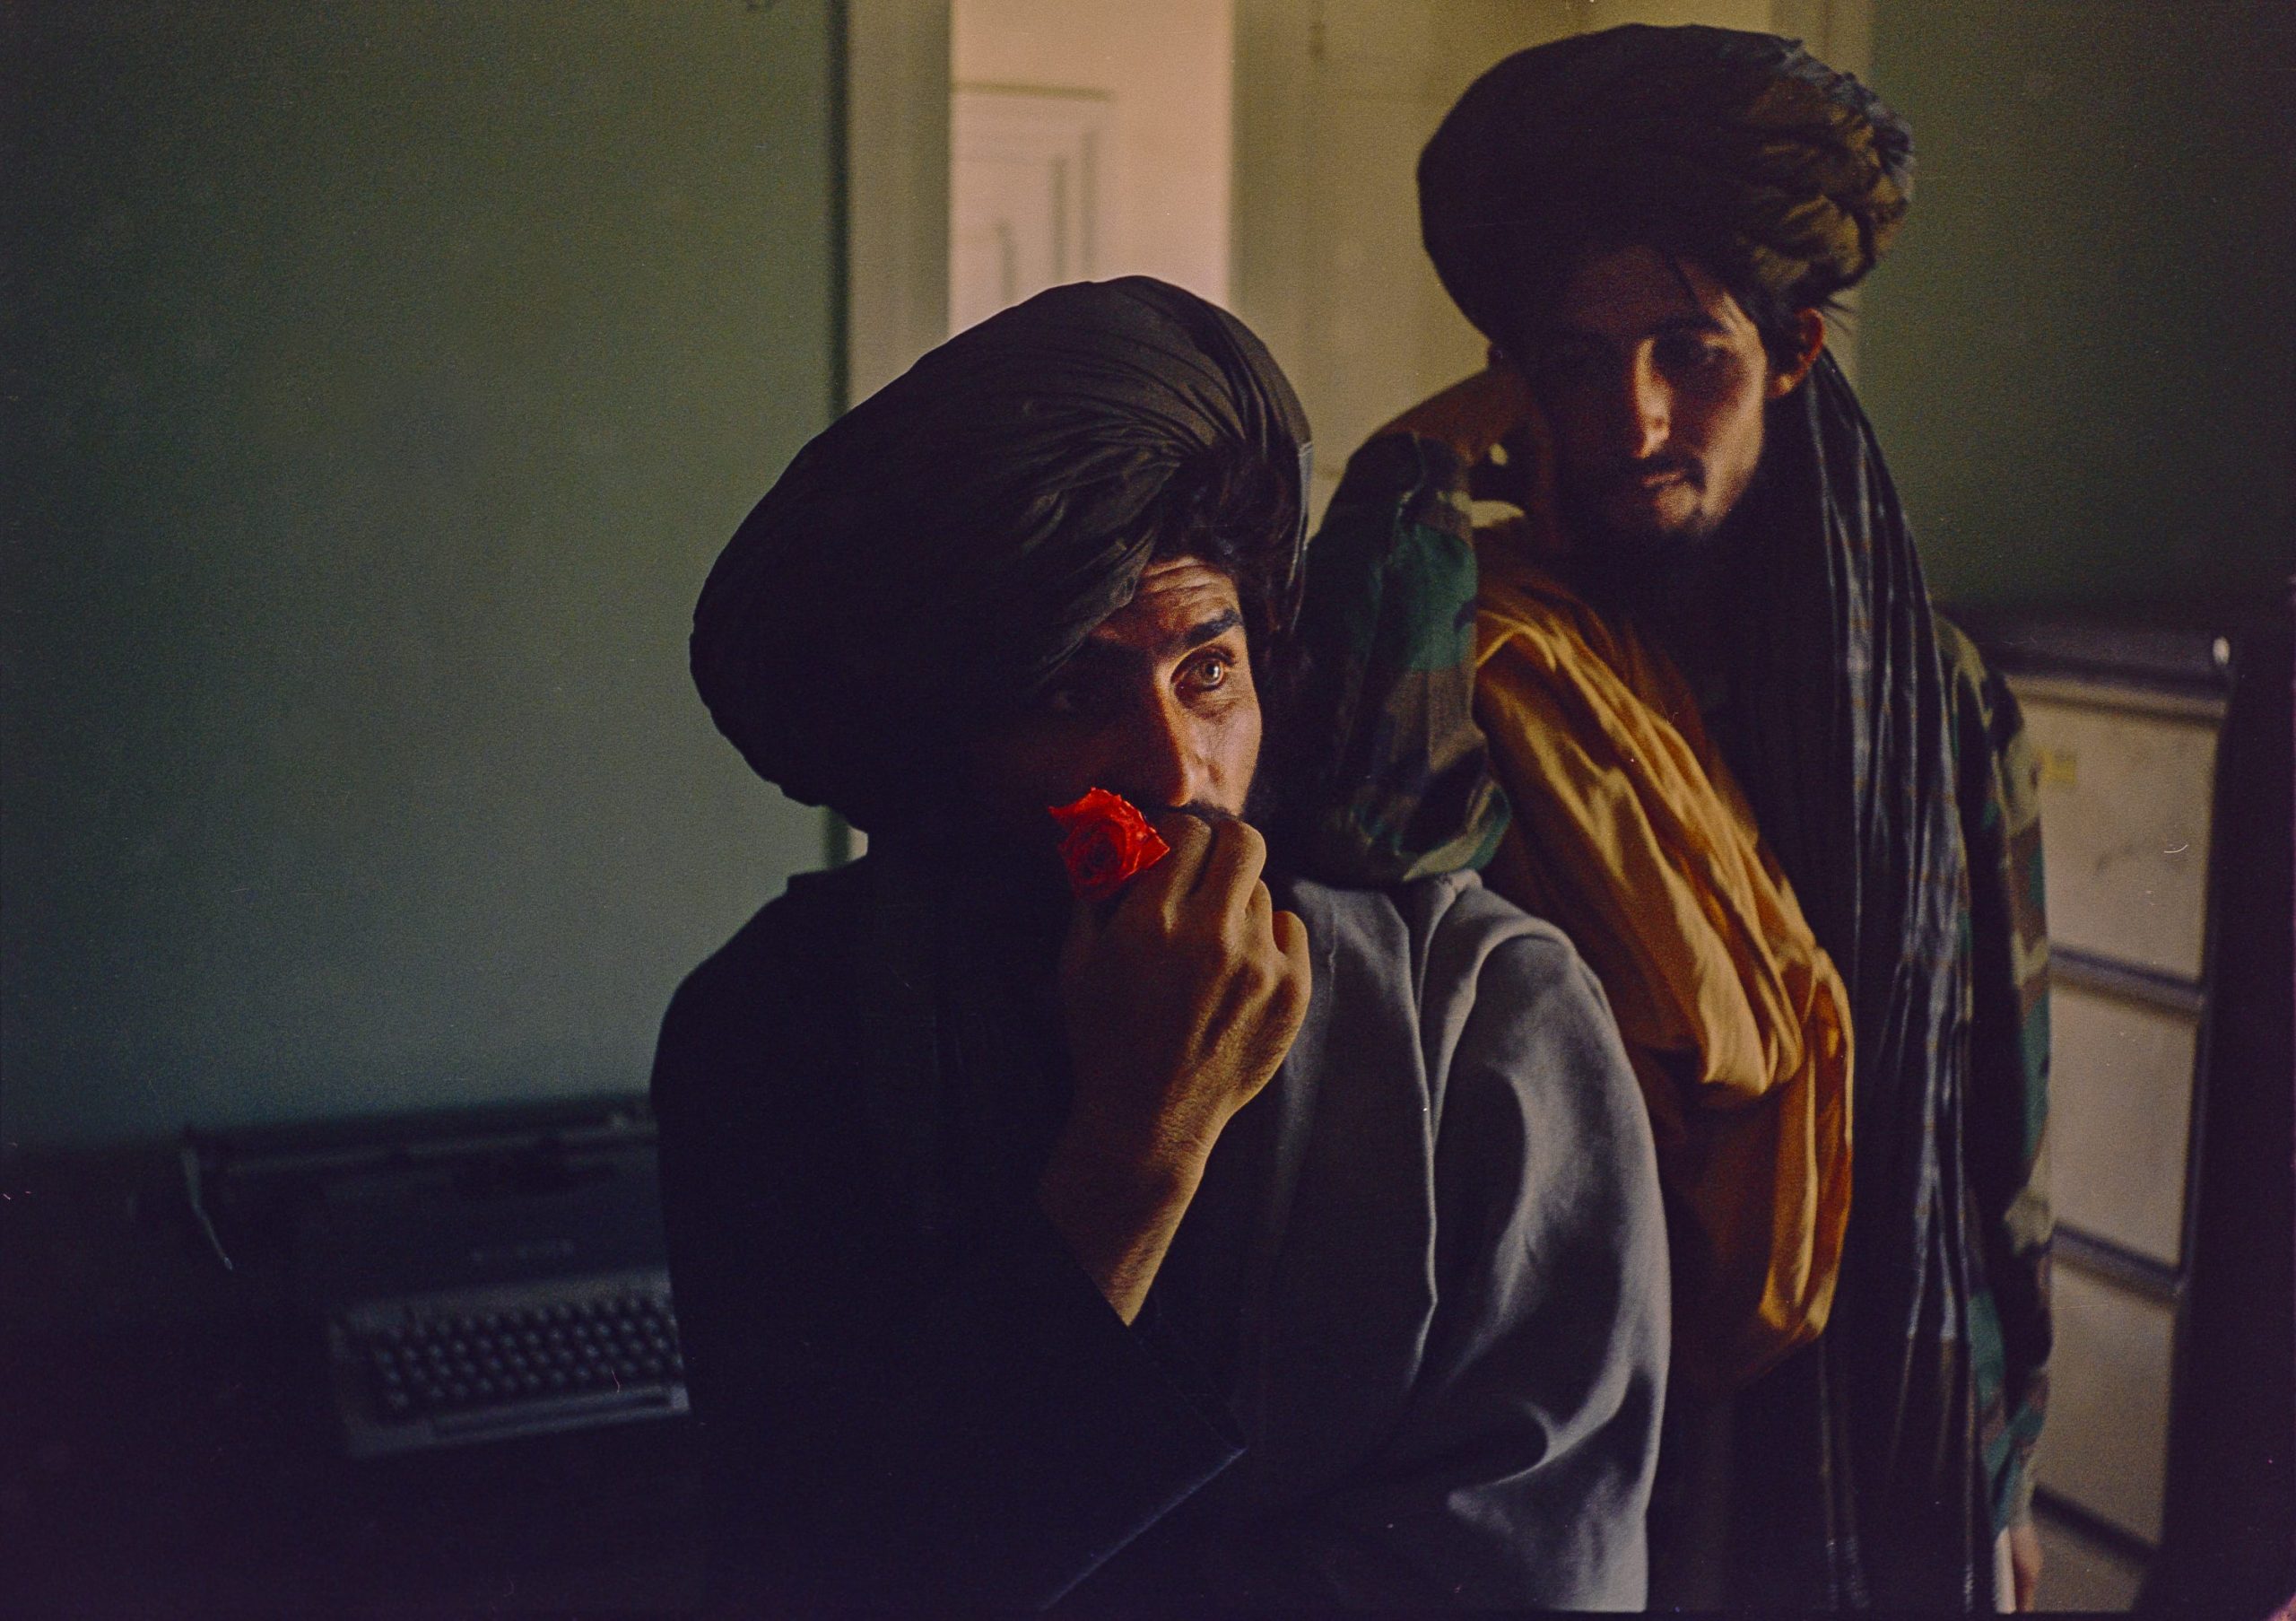 A Taliban fighter holds a flower in his hand, as another stands behind him.